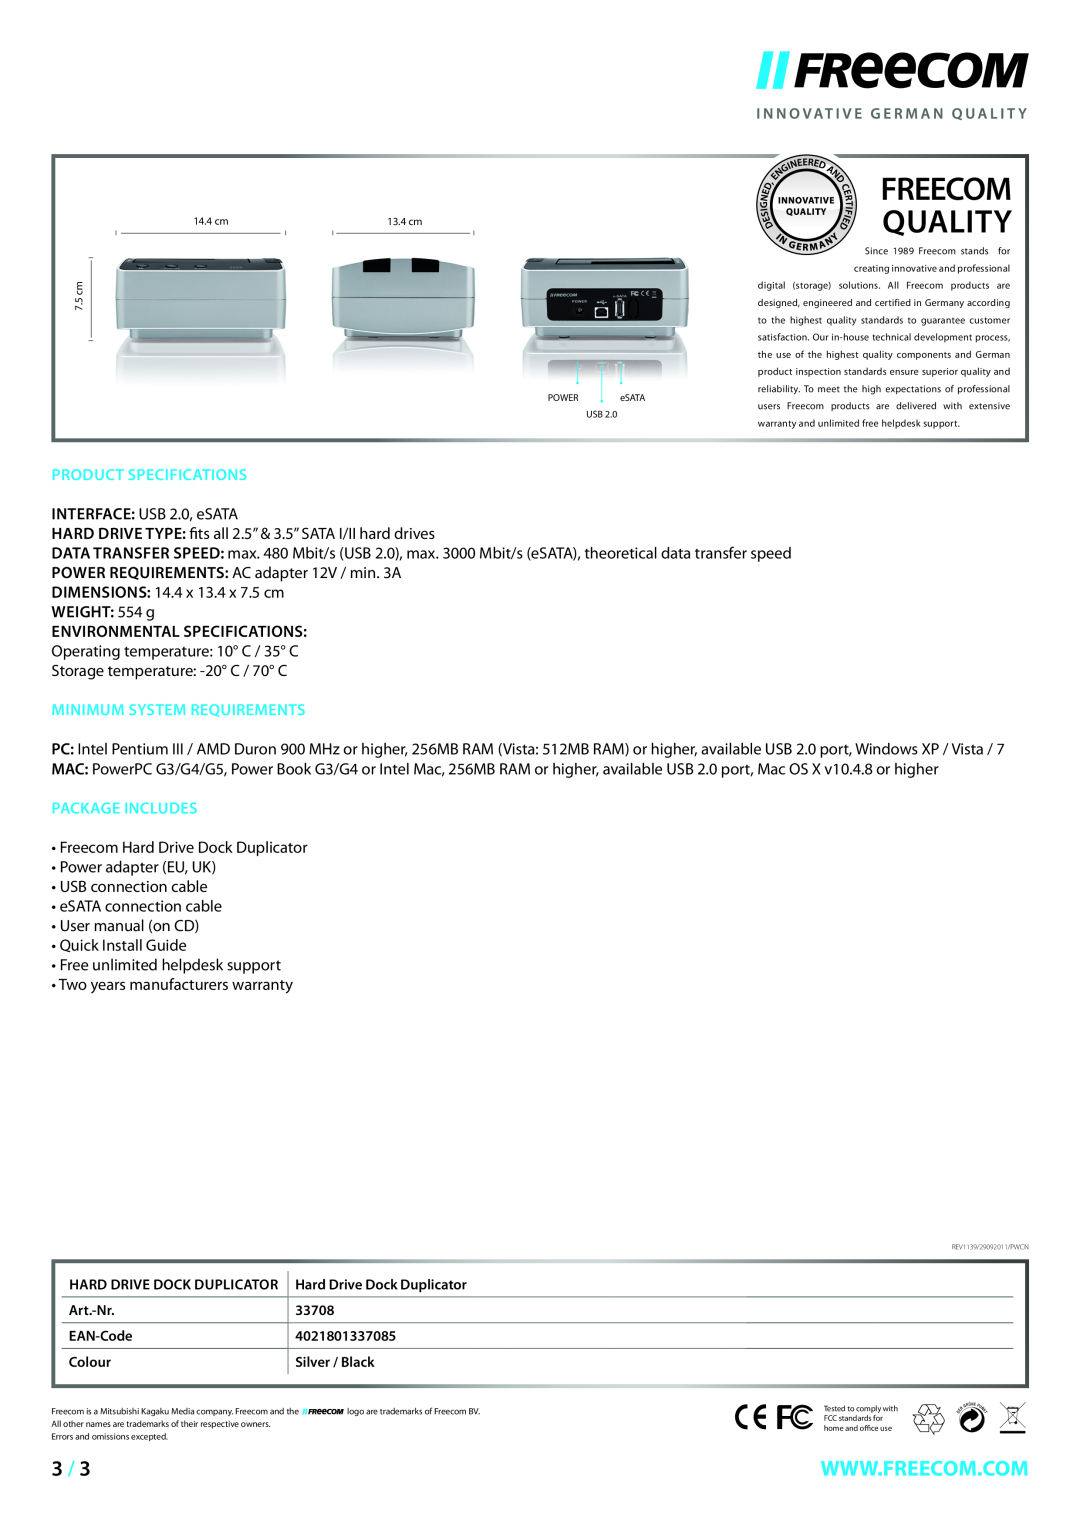 Freecom Technologies Hard Drive Dock Duplicator Product Specifications, Minimum System Requirements, Package Includes 